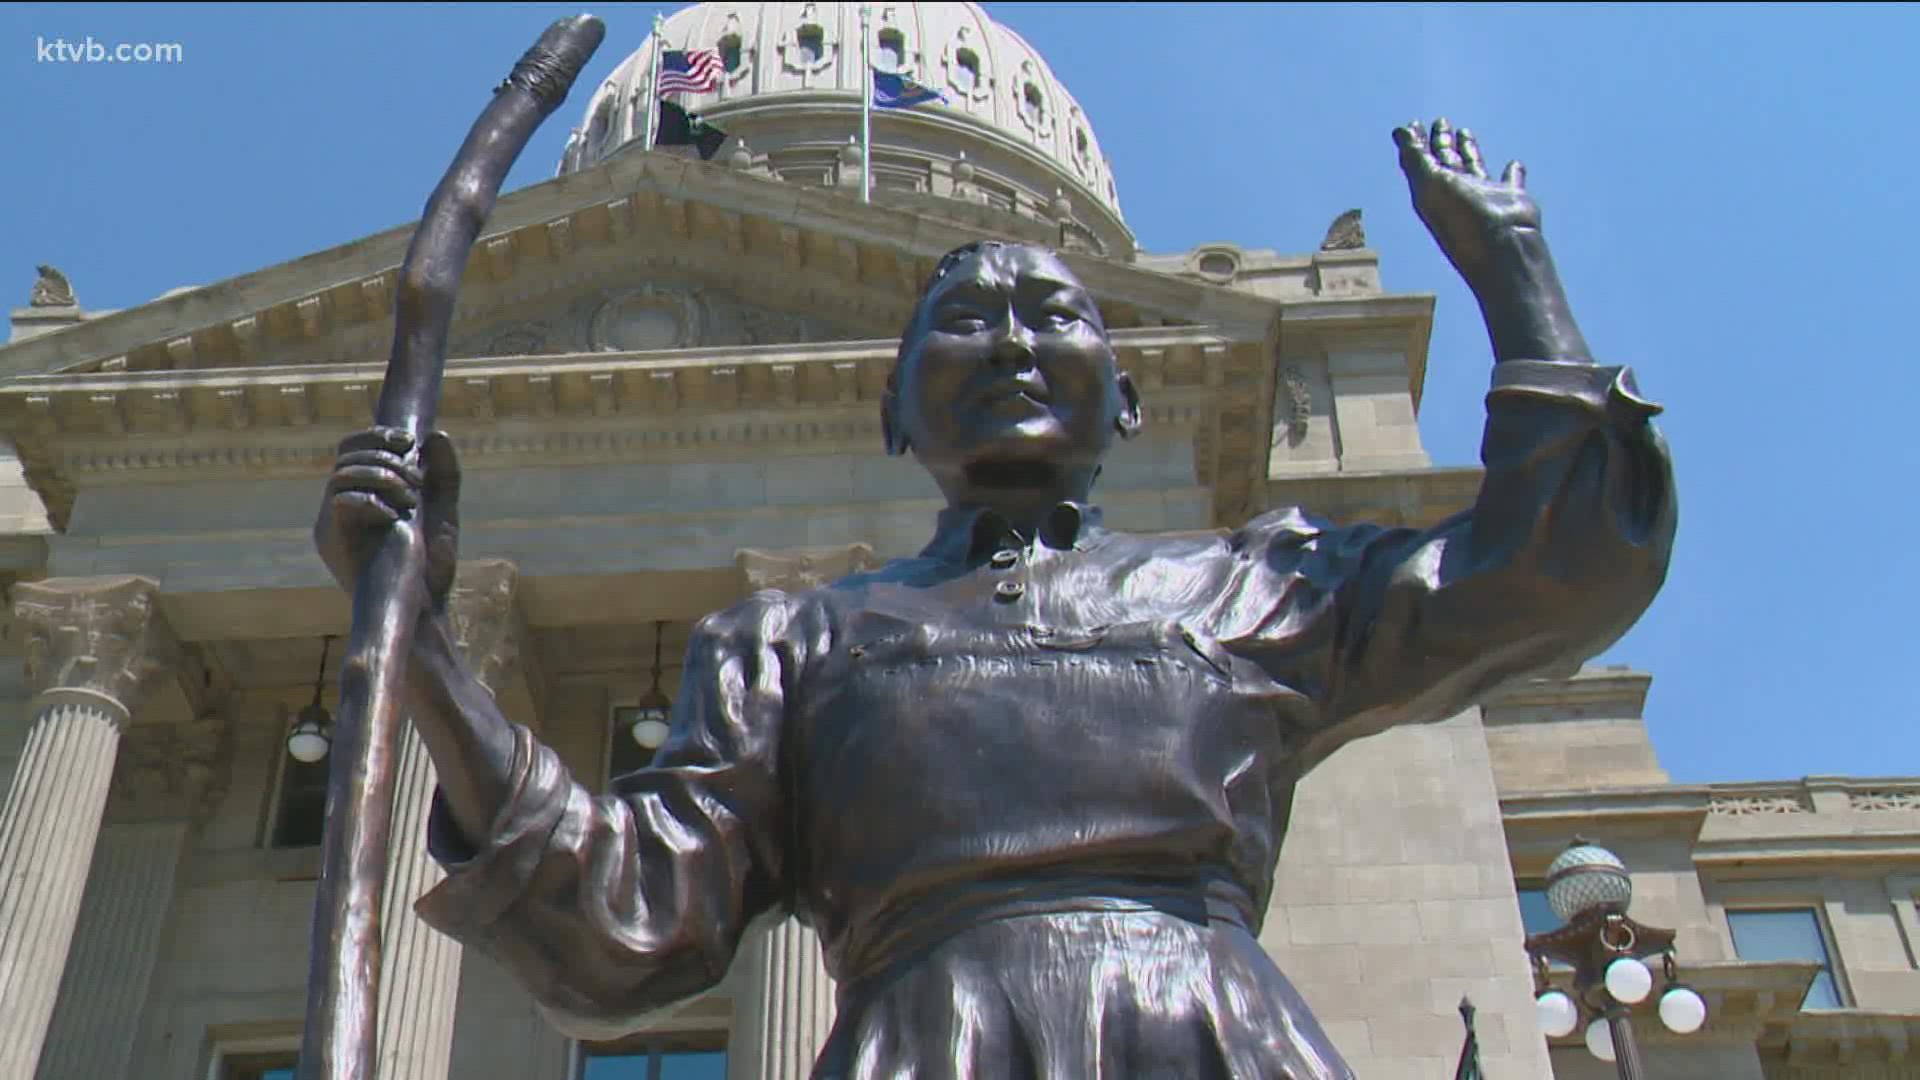 Irene Deely created a bronze statue of Bemis, unveiled at the statehouse, and soon to be moved to the historic Polly Bemis Ranch along the Salmon River.